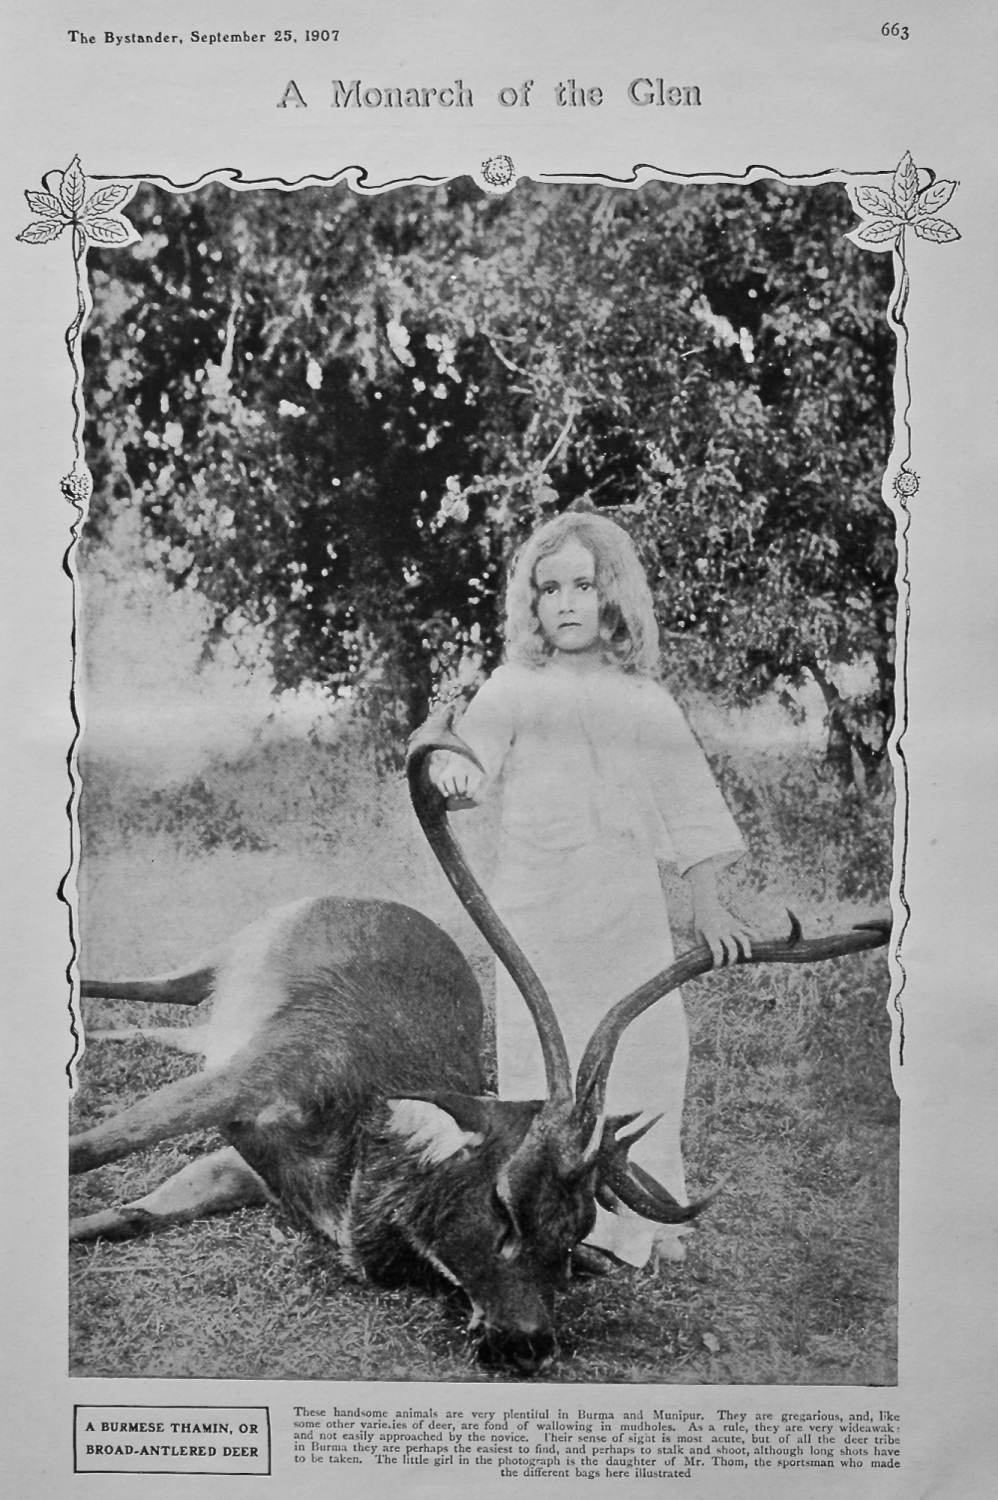 A Monarch of the glen : A Burmese Thamin, or Broad-Antlered Deer. 1907.